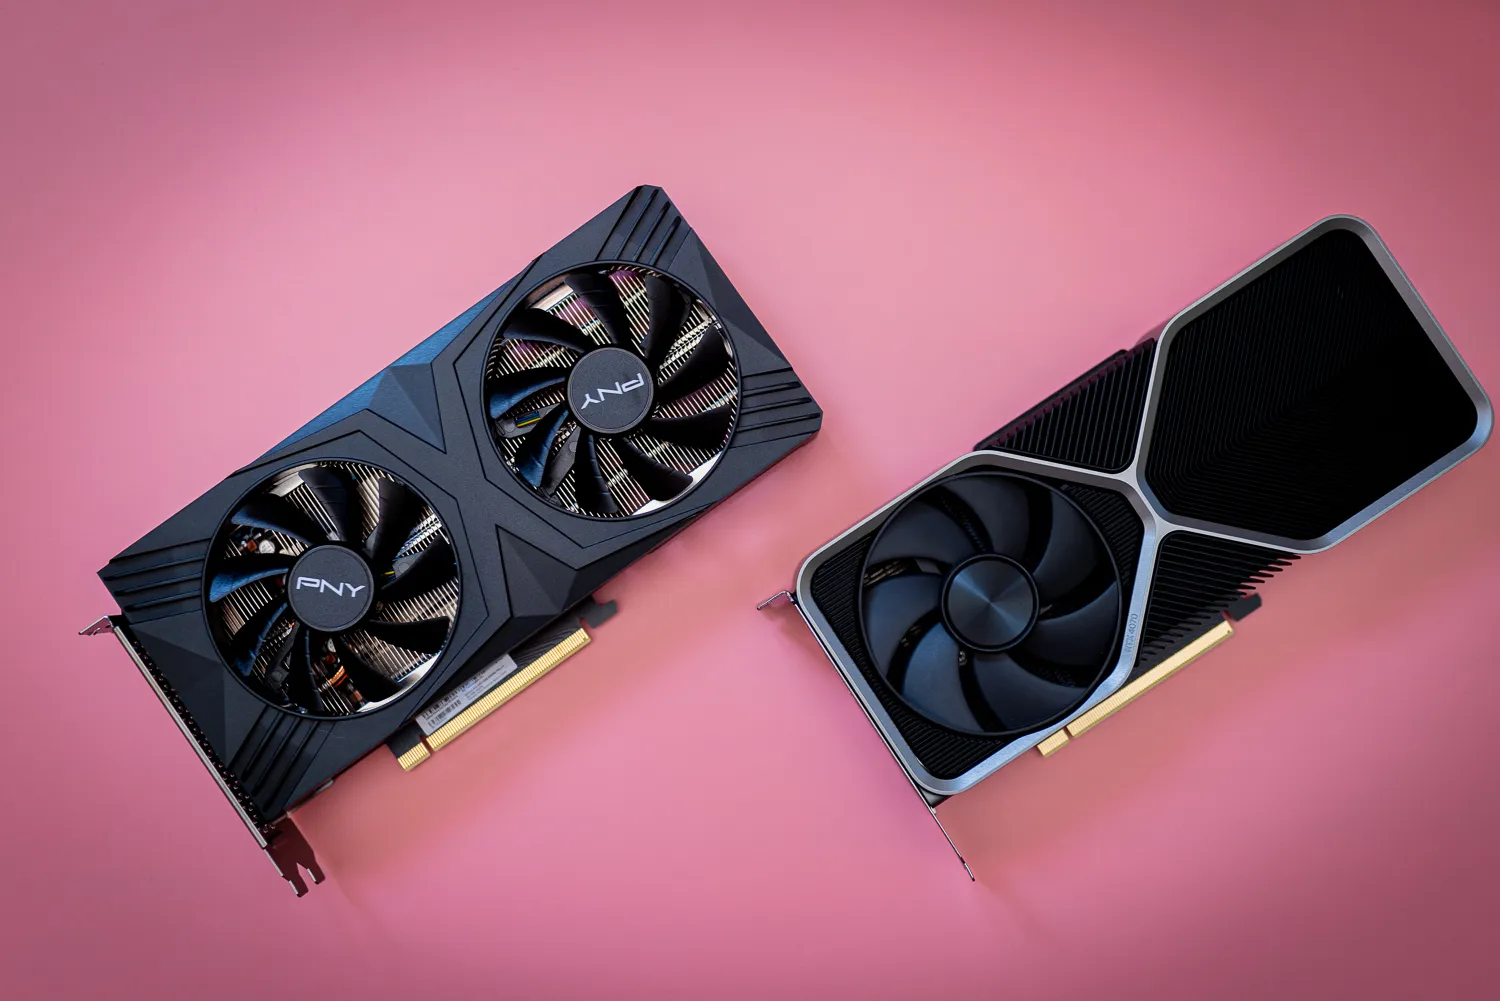 Nvidia’s RTX 4070 graphics cards over a pink background.